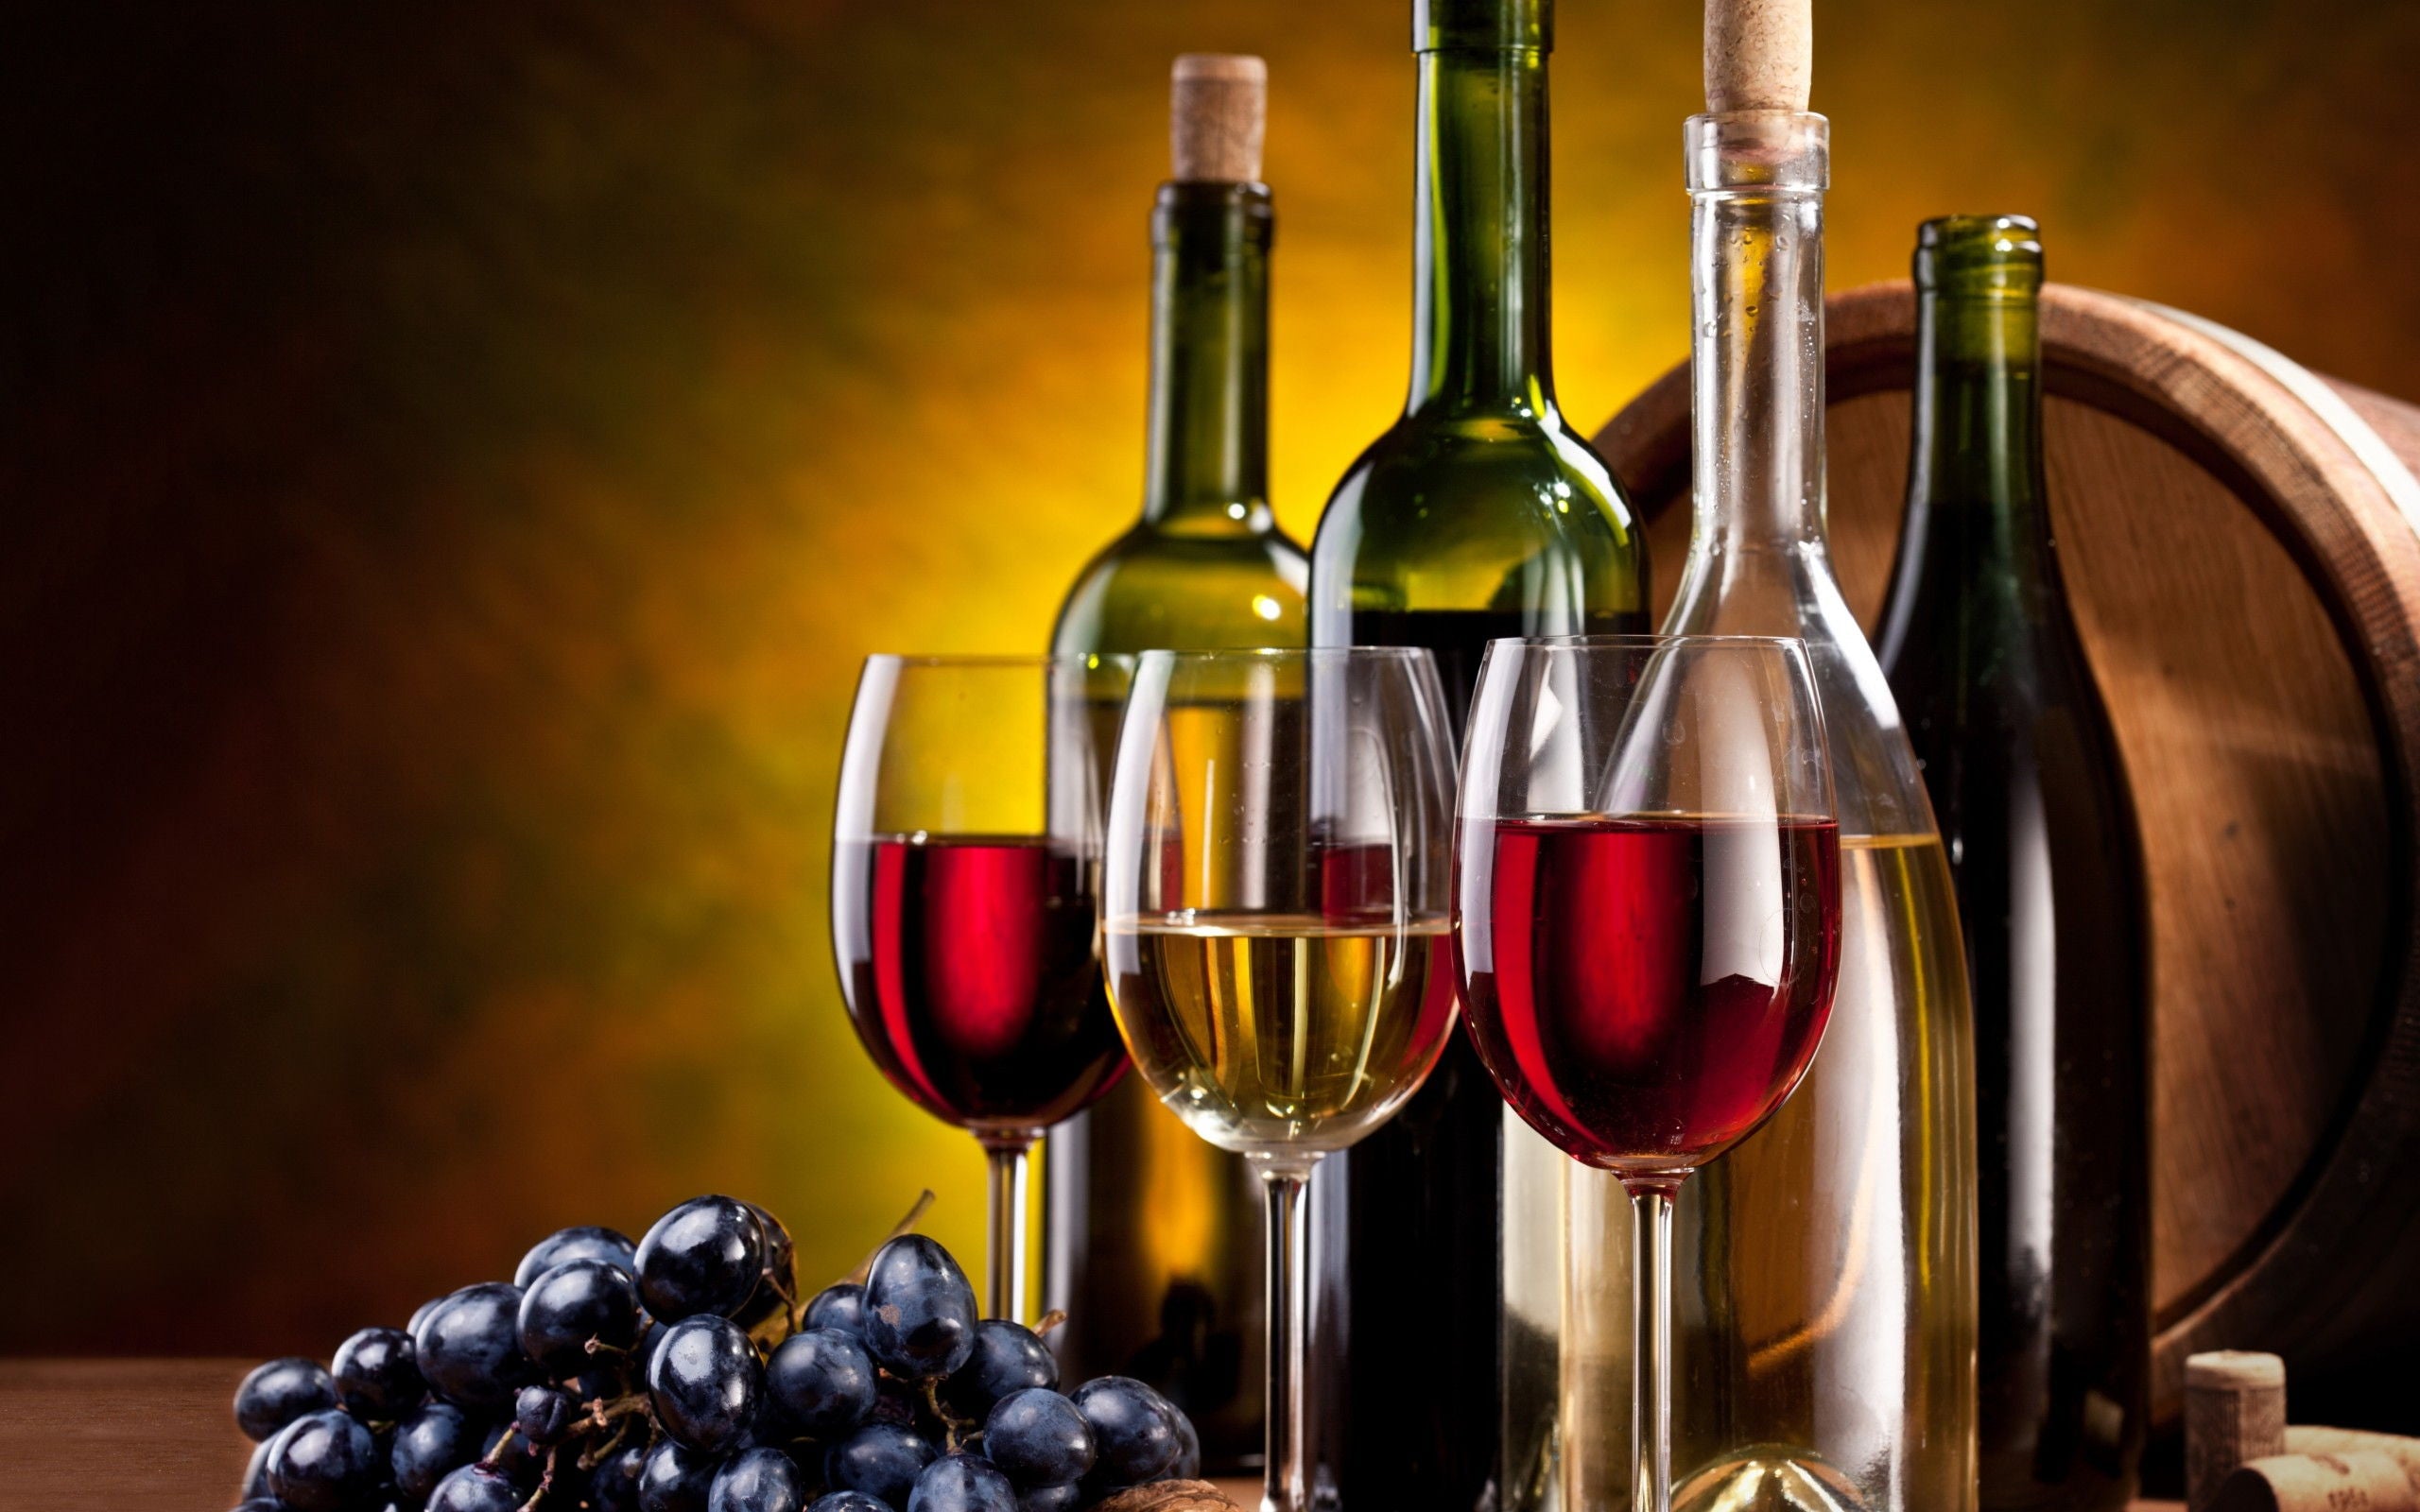 Less Sulphites in Craft Produced Wine